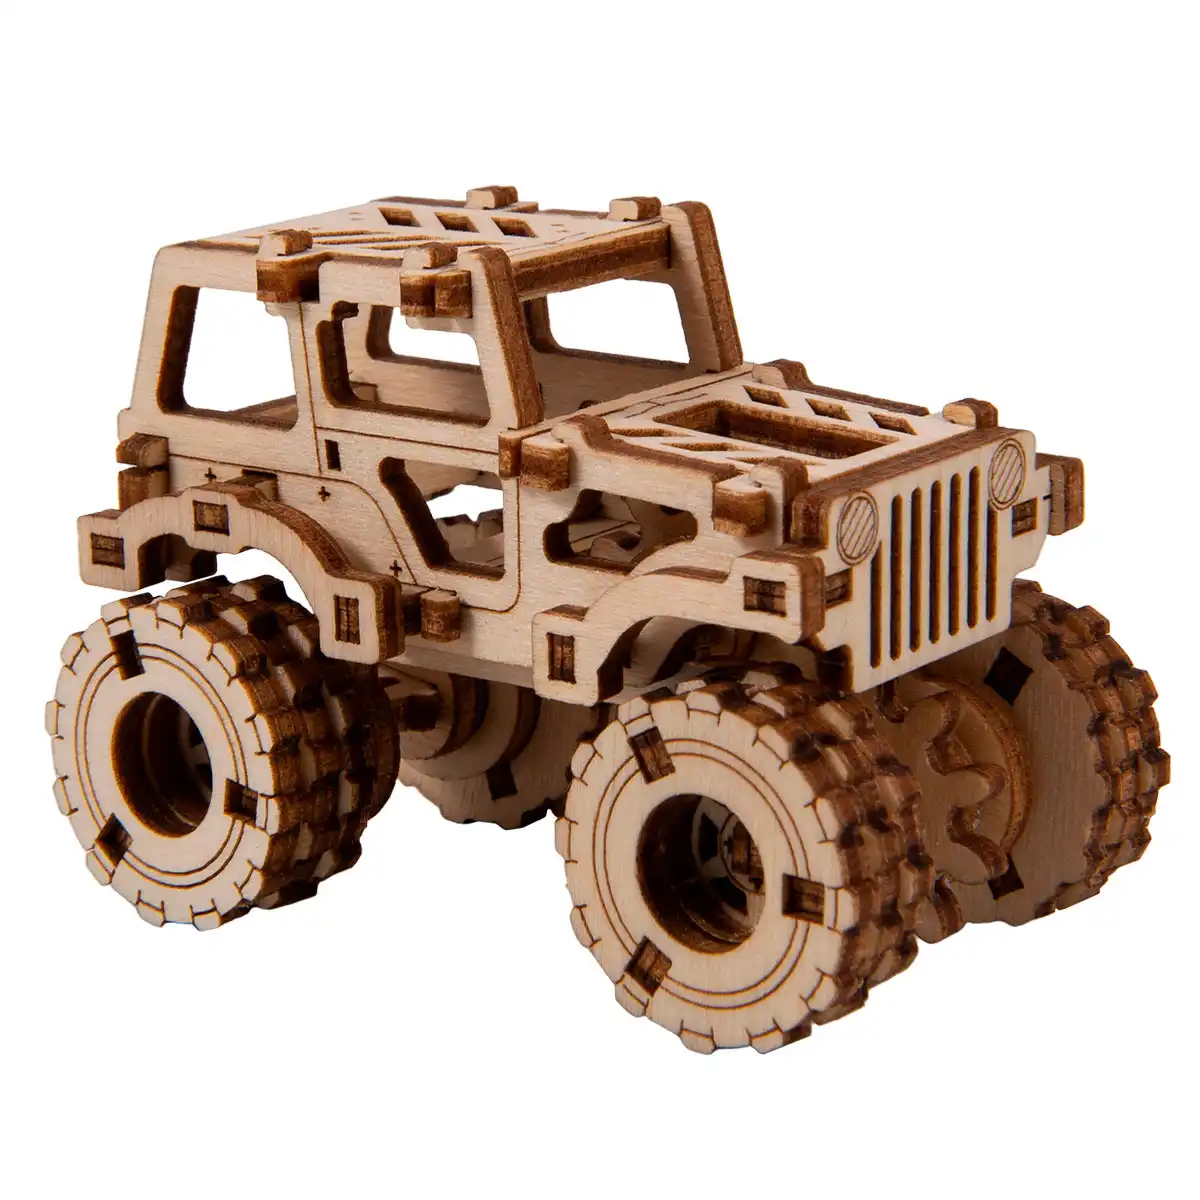 WOODEN.CITY Vintage Cars Monster Truck 4 - DIY 3D Wooden Model Kits For  Adults To Build Cars - 3D Wooden Puzzles for Adults Brain Teaser - Wood Car